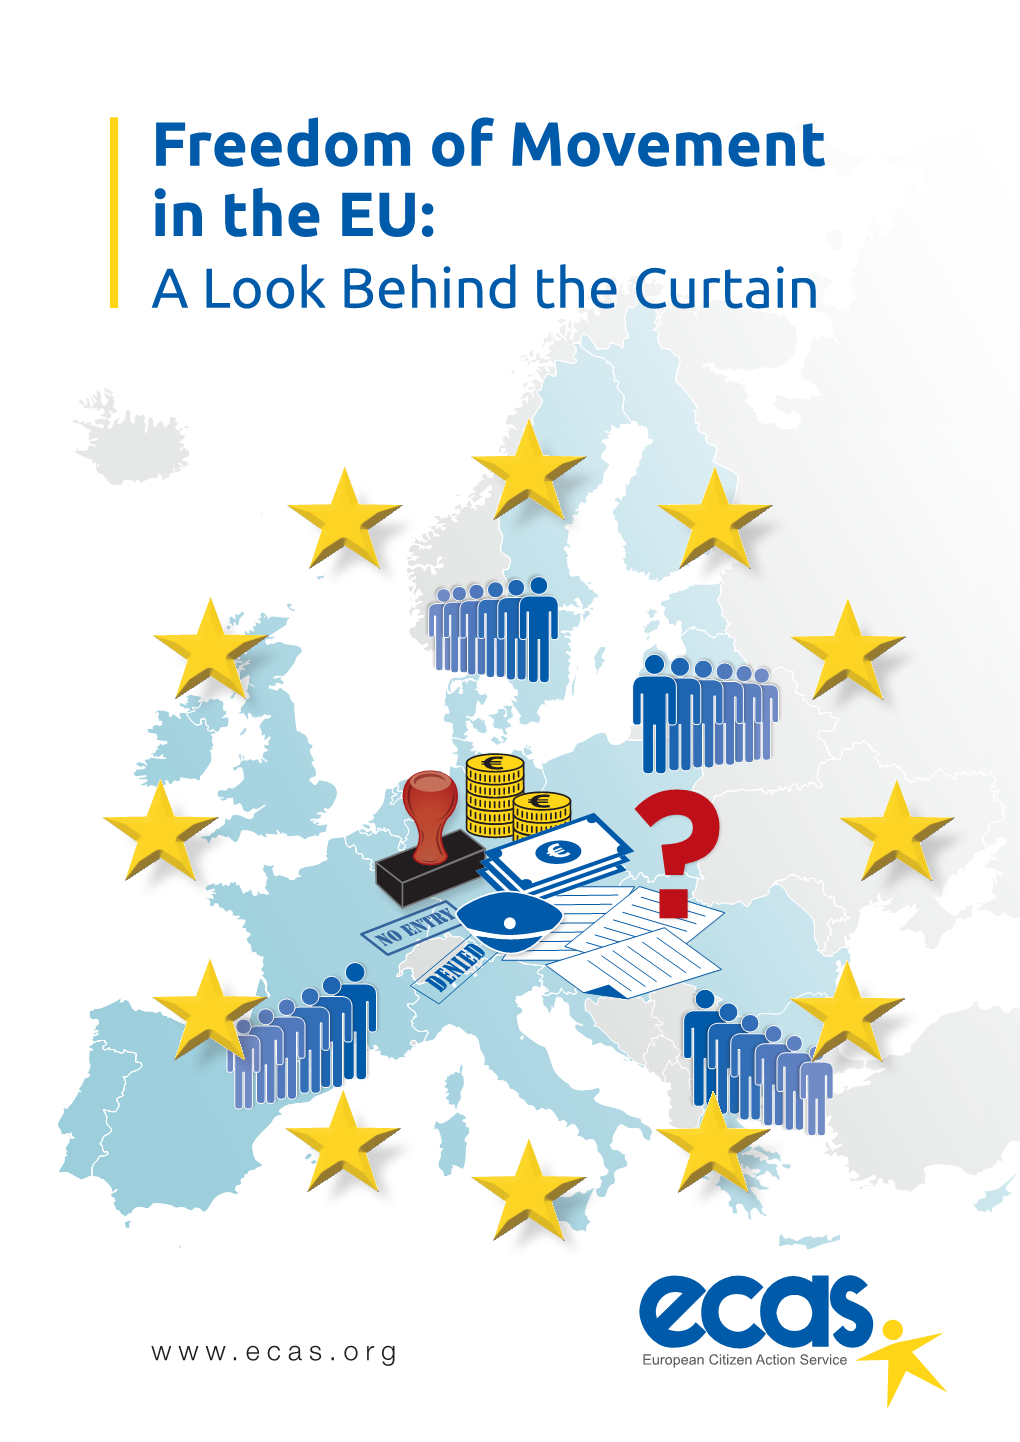 Freedom of Movement in the EU: a Look Behind the Curtain